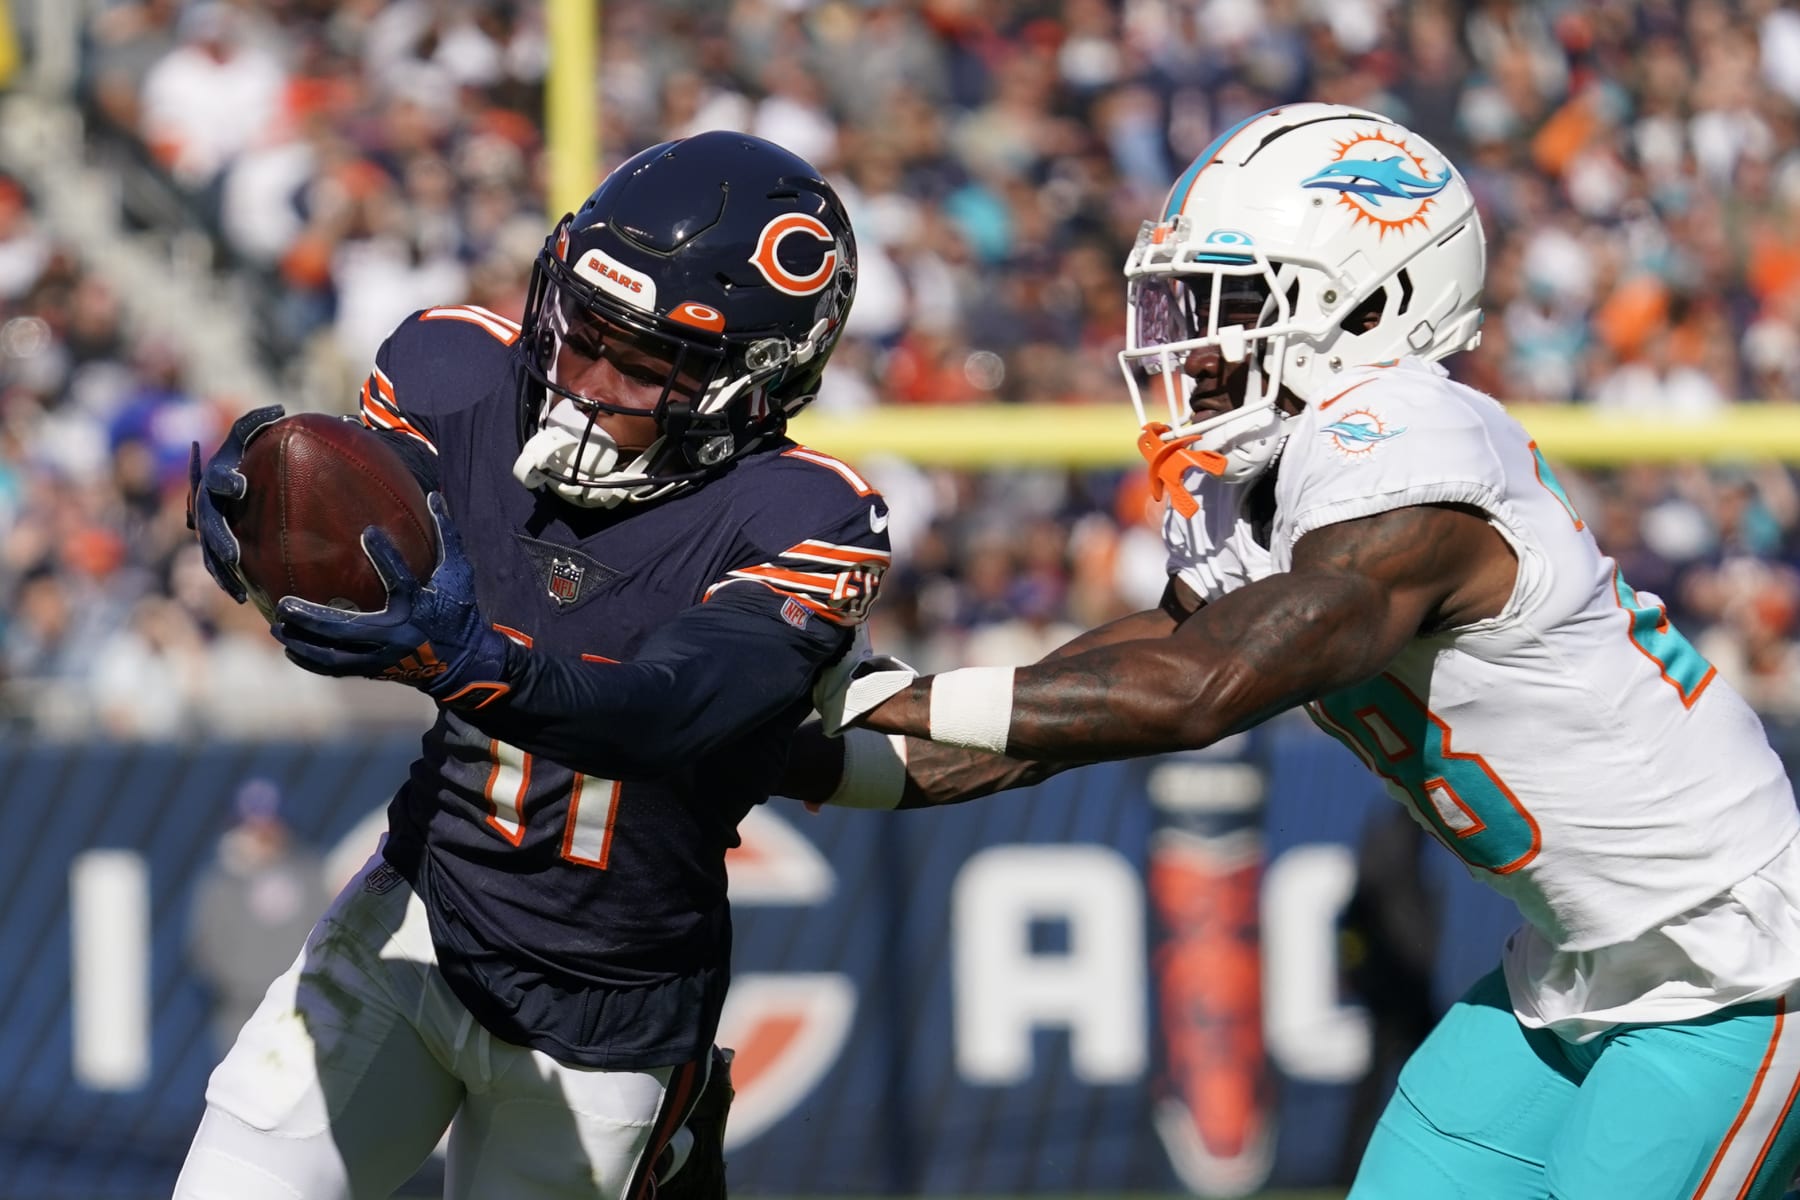 Dolphins-Bears: Top takeaways from Miami's win in Chicago